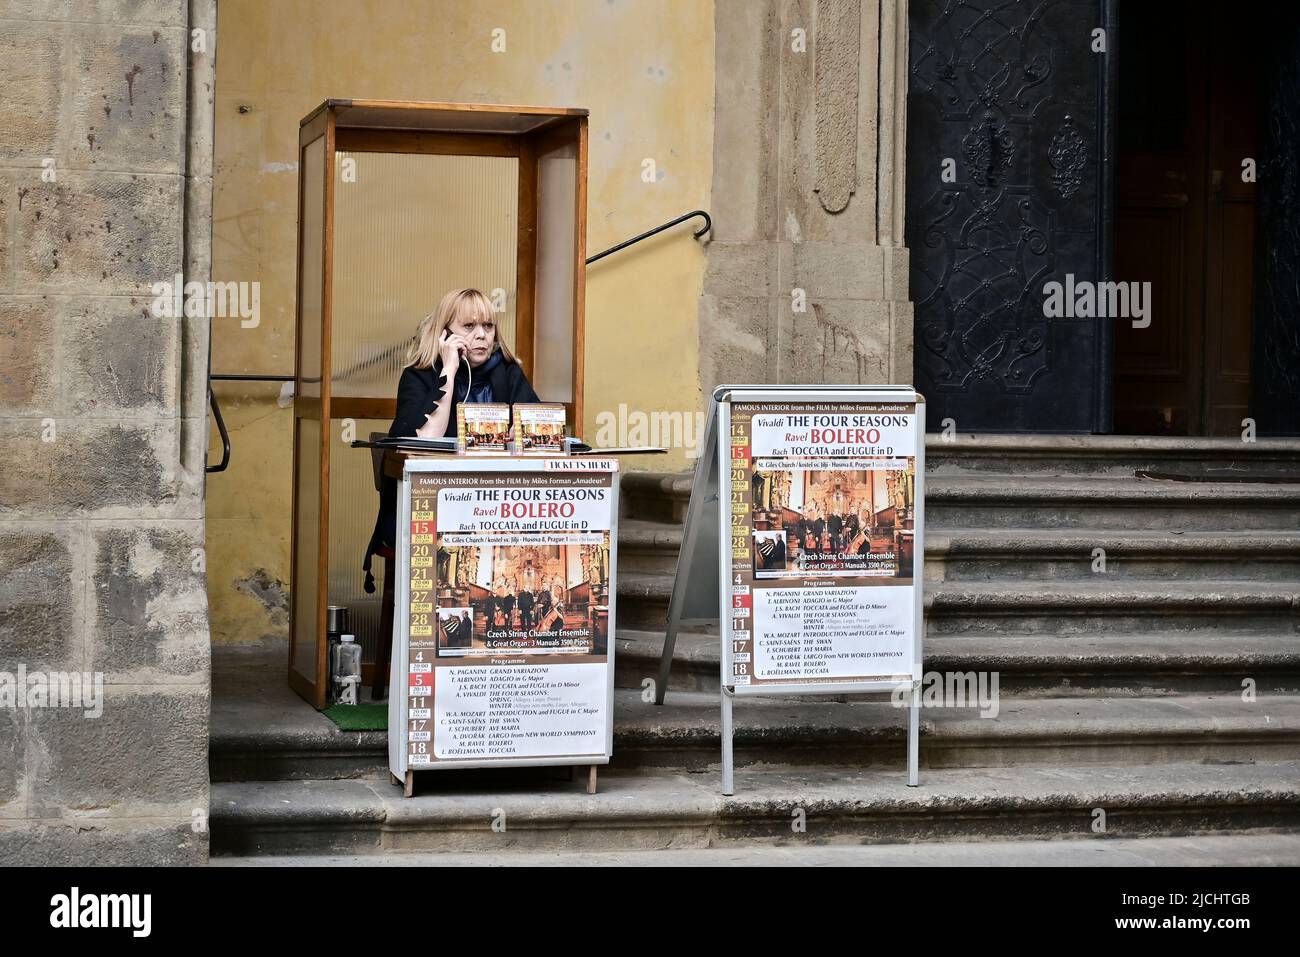 A subtle moment of the real people living in Praha. Stock Photo